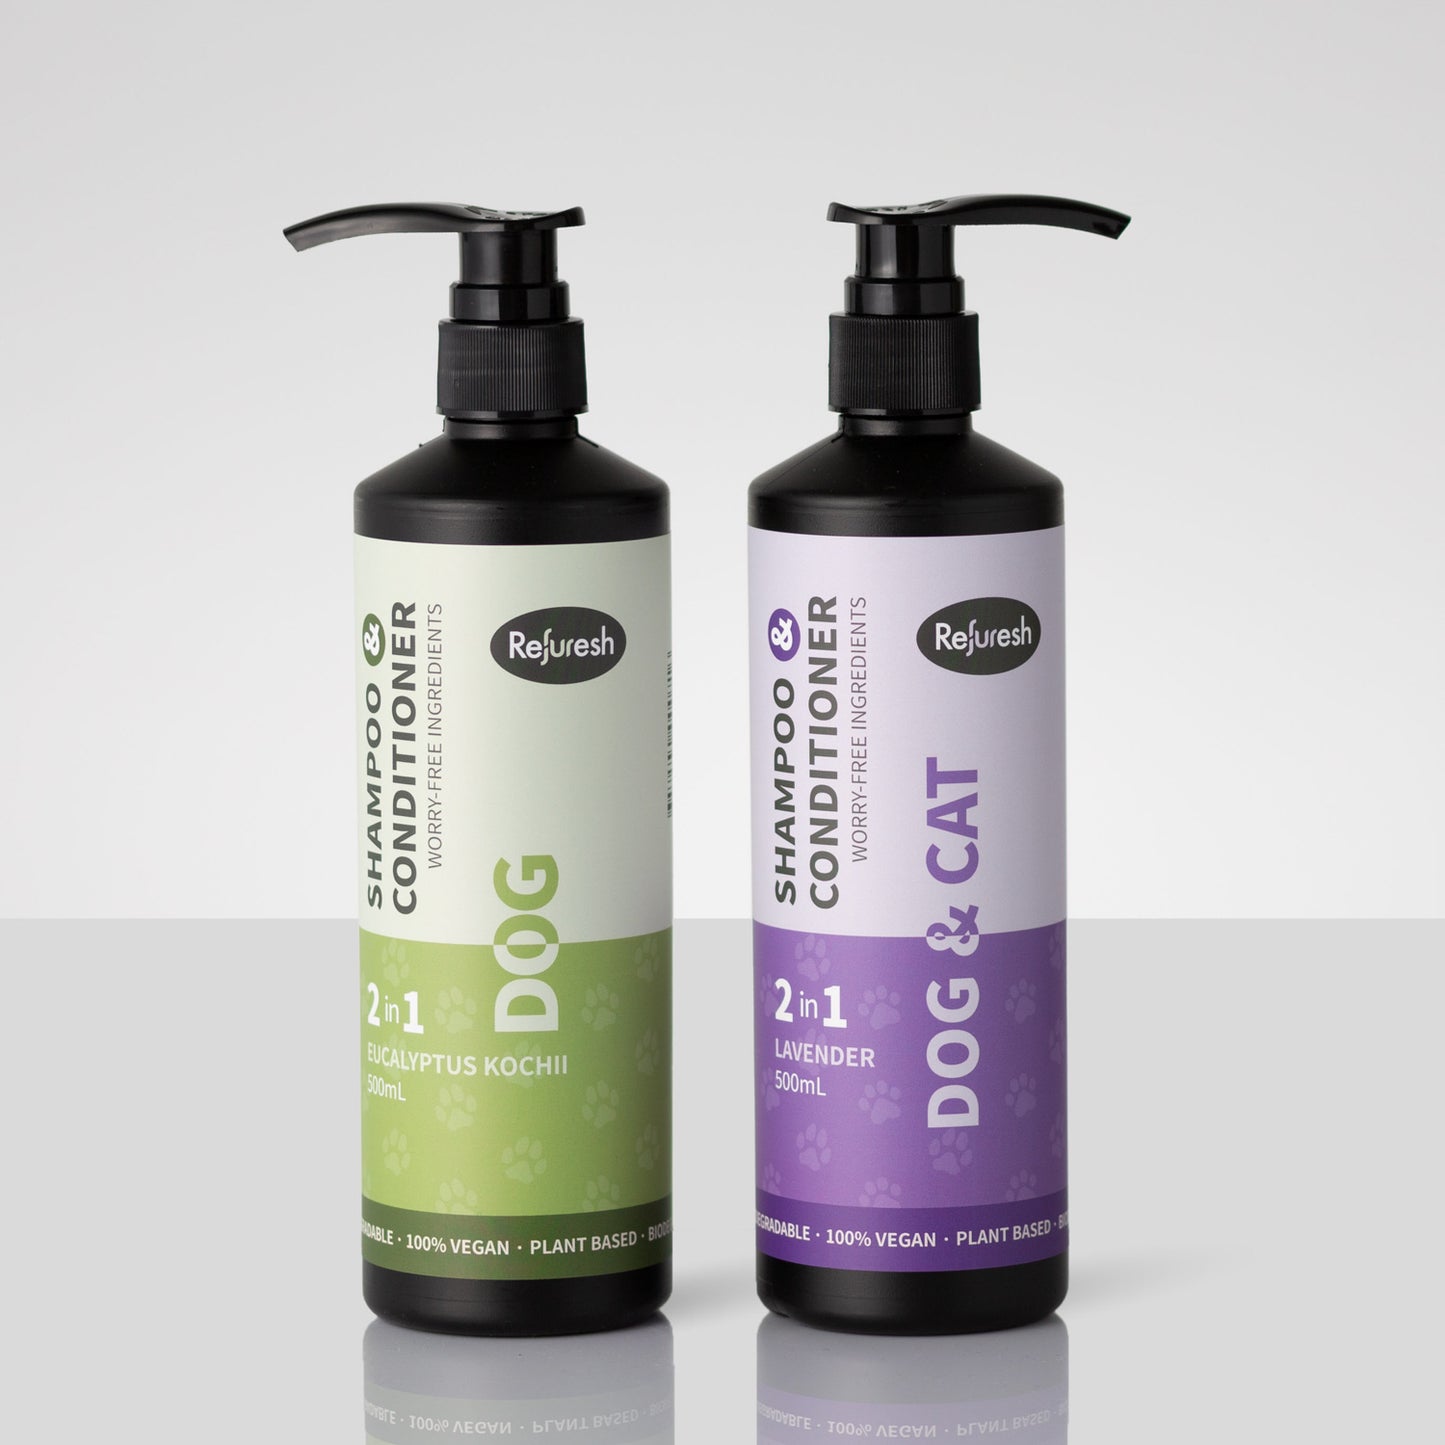 2 in 1 Calming shampoo & conditioner for dogs and cats